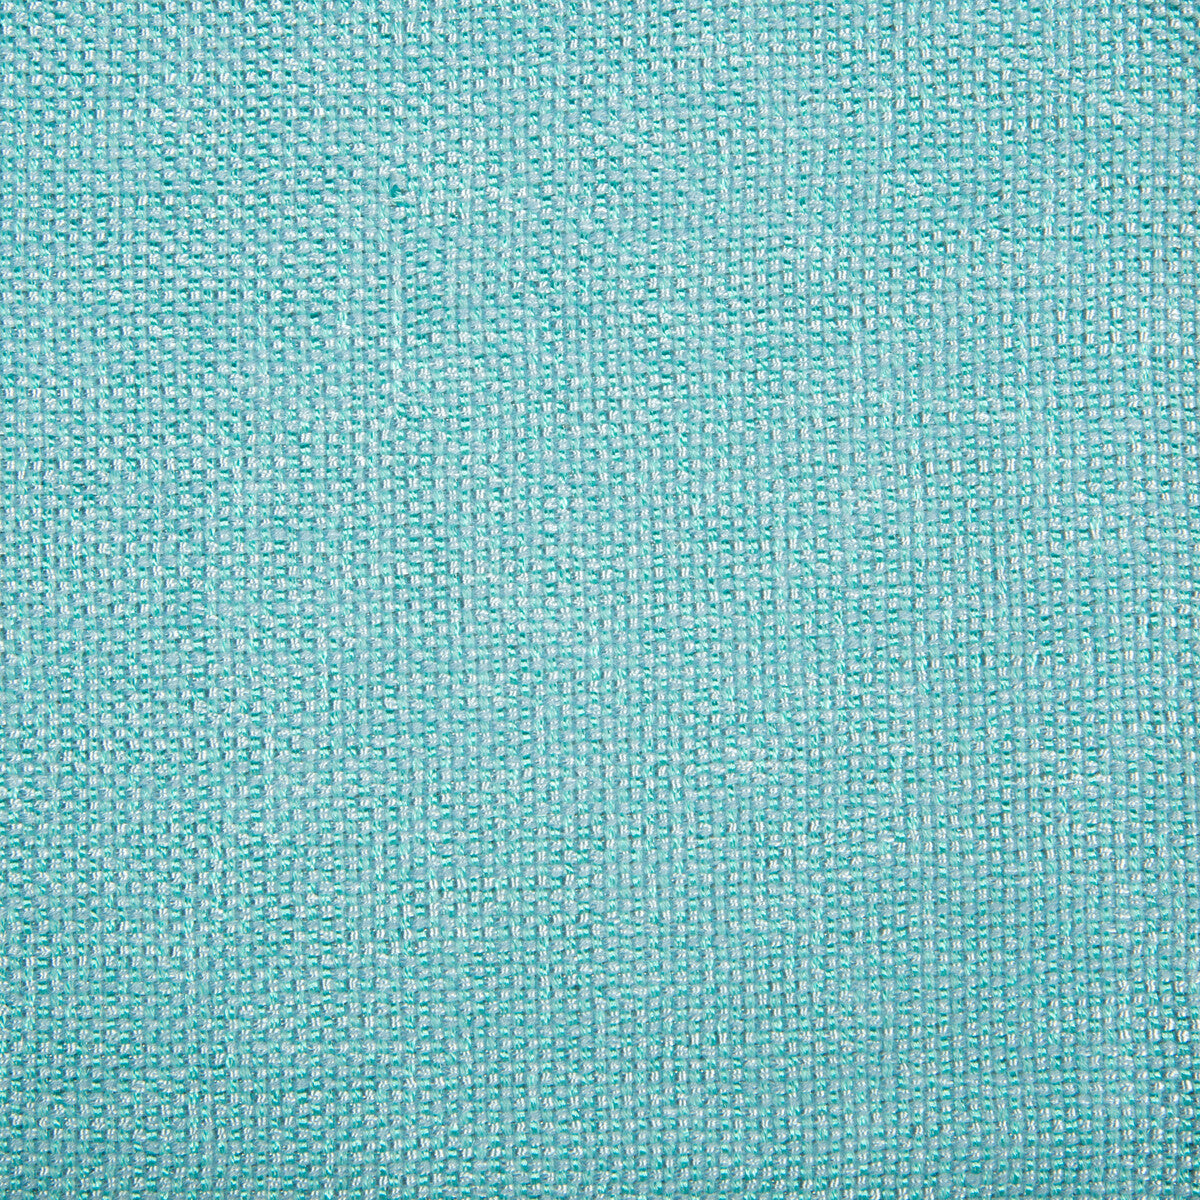 Kravet Contract fabric in 4458-115 color - pattern 4458.115.0 - by Kravet Contract